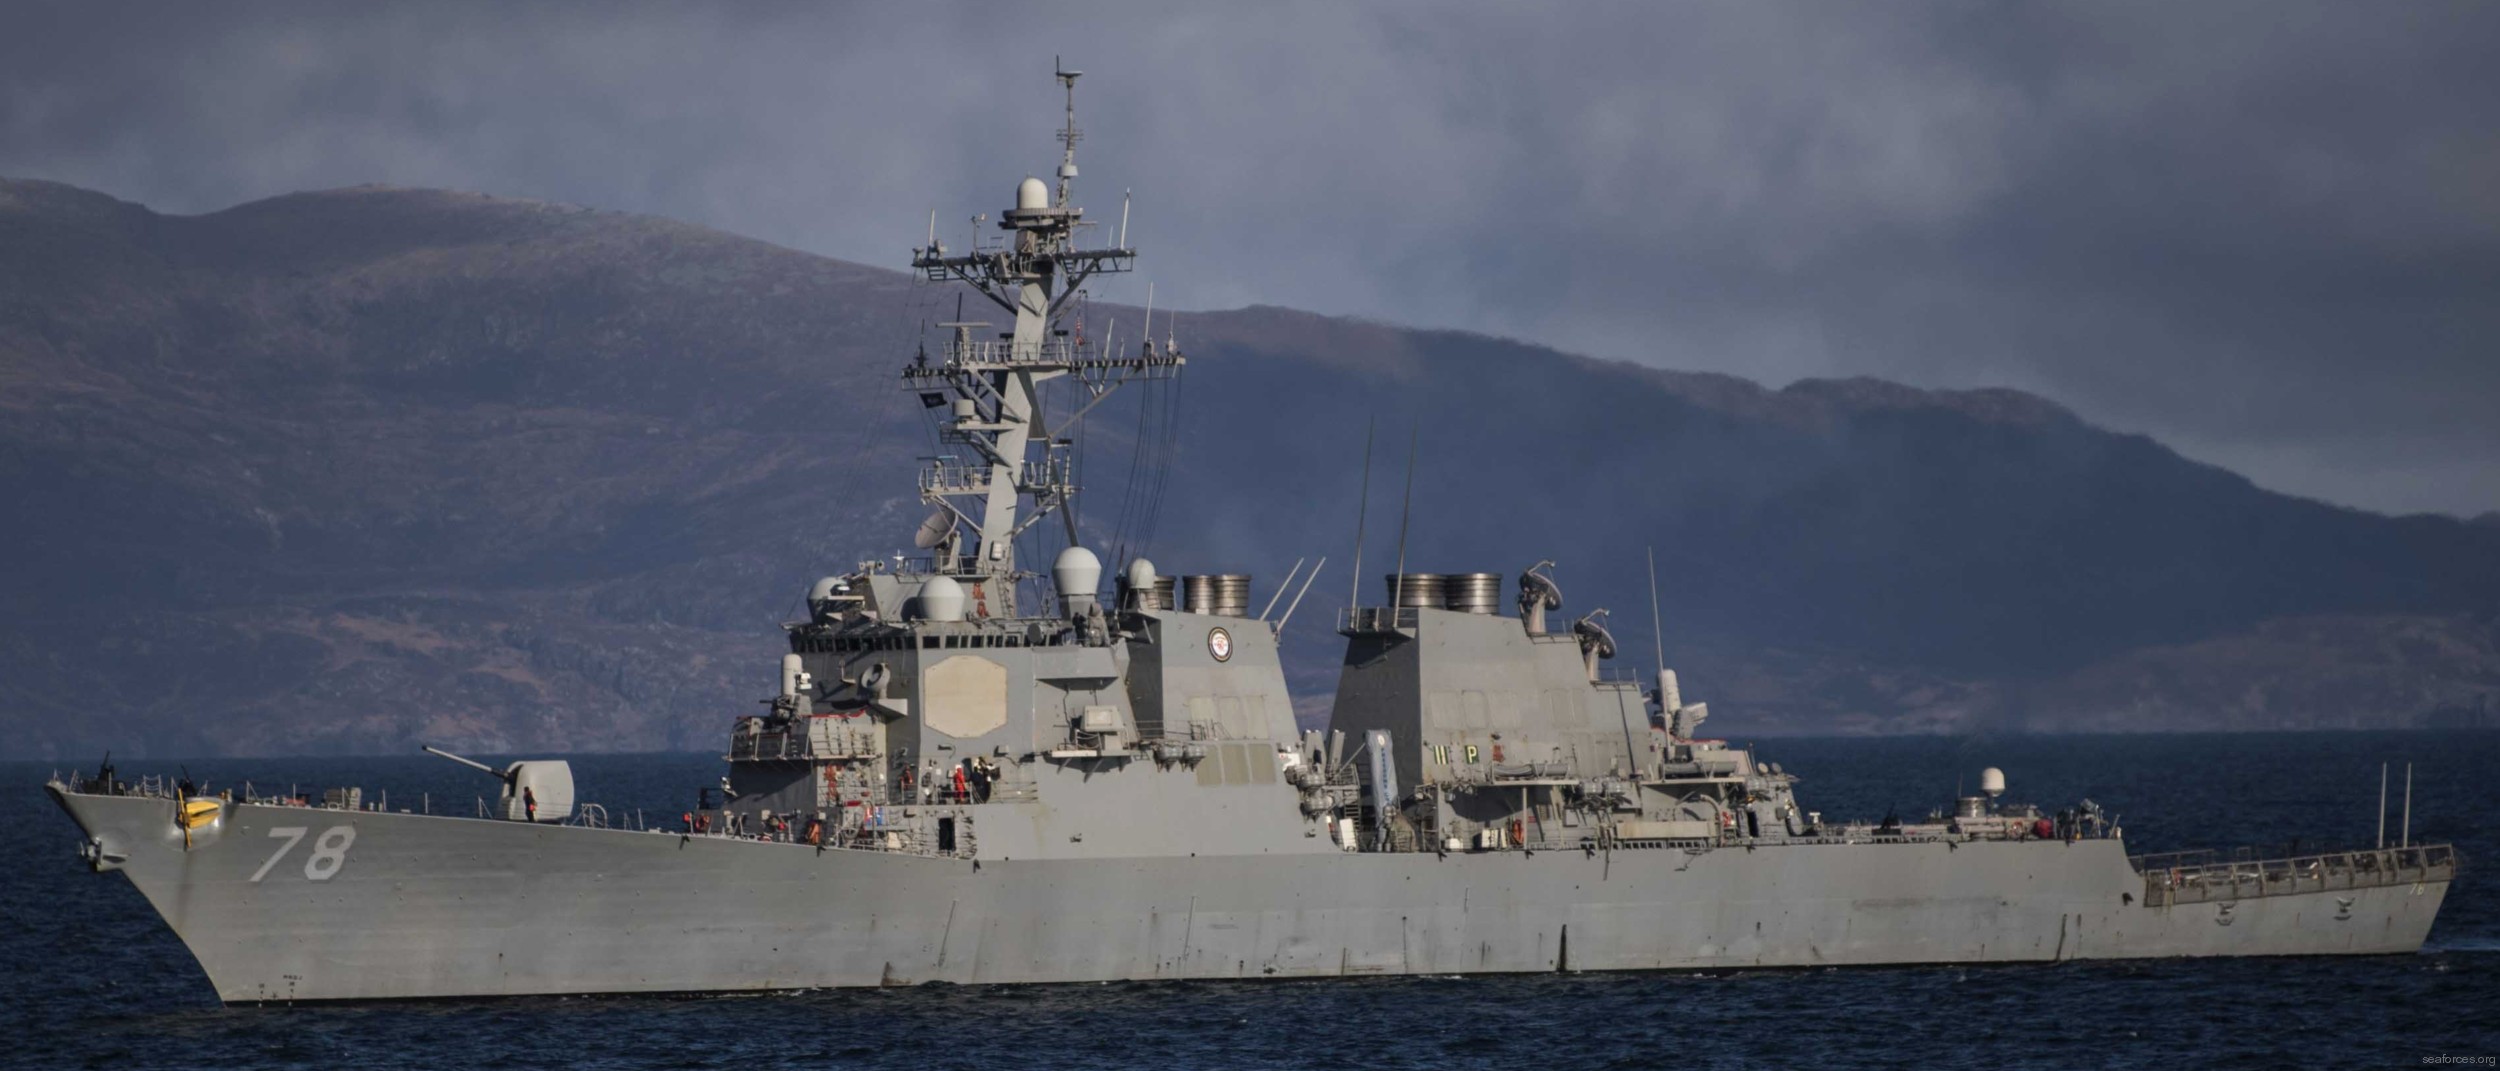 ddg-78 uss porter guided missile destroyer arleigh burke class aegis 20 north channel exercise joint warrior